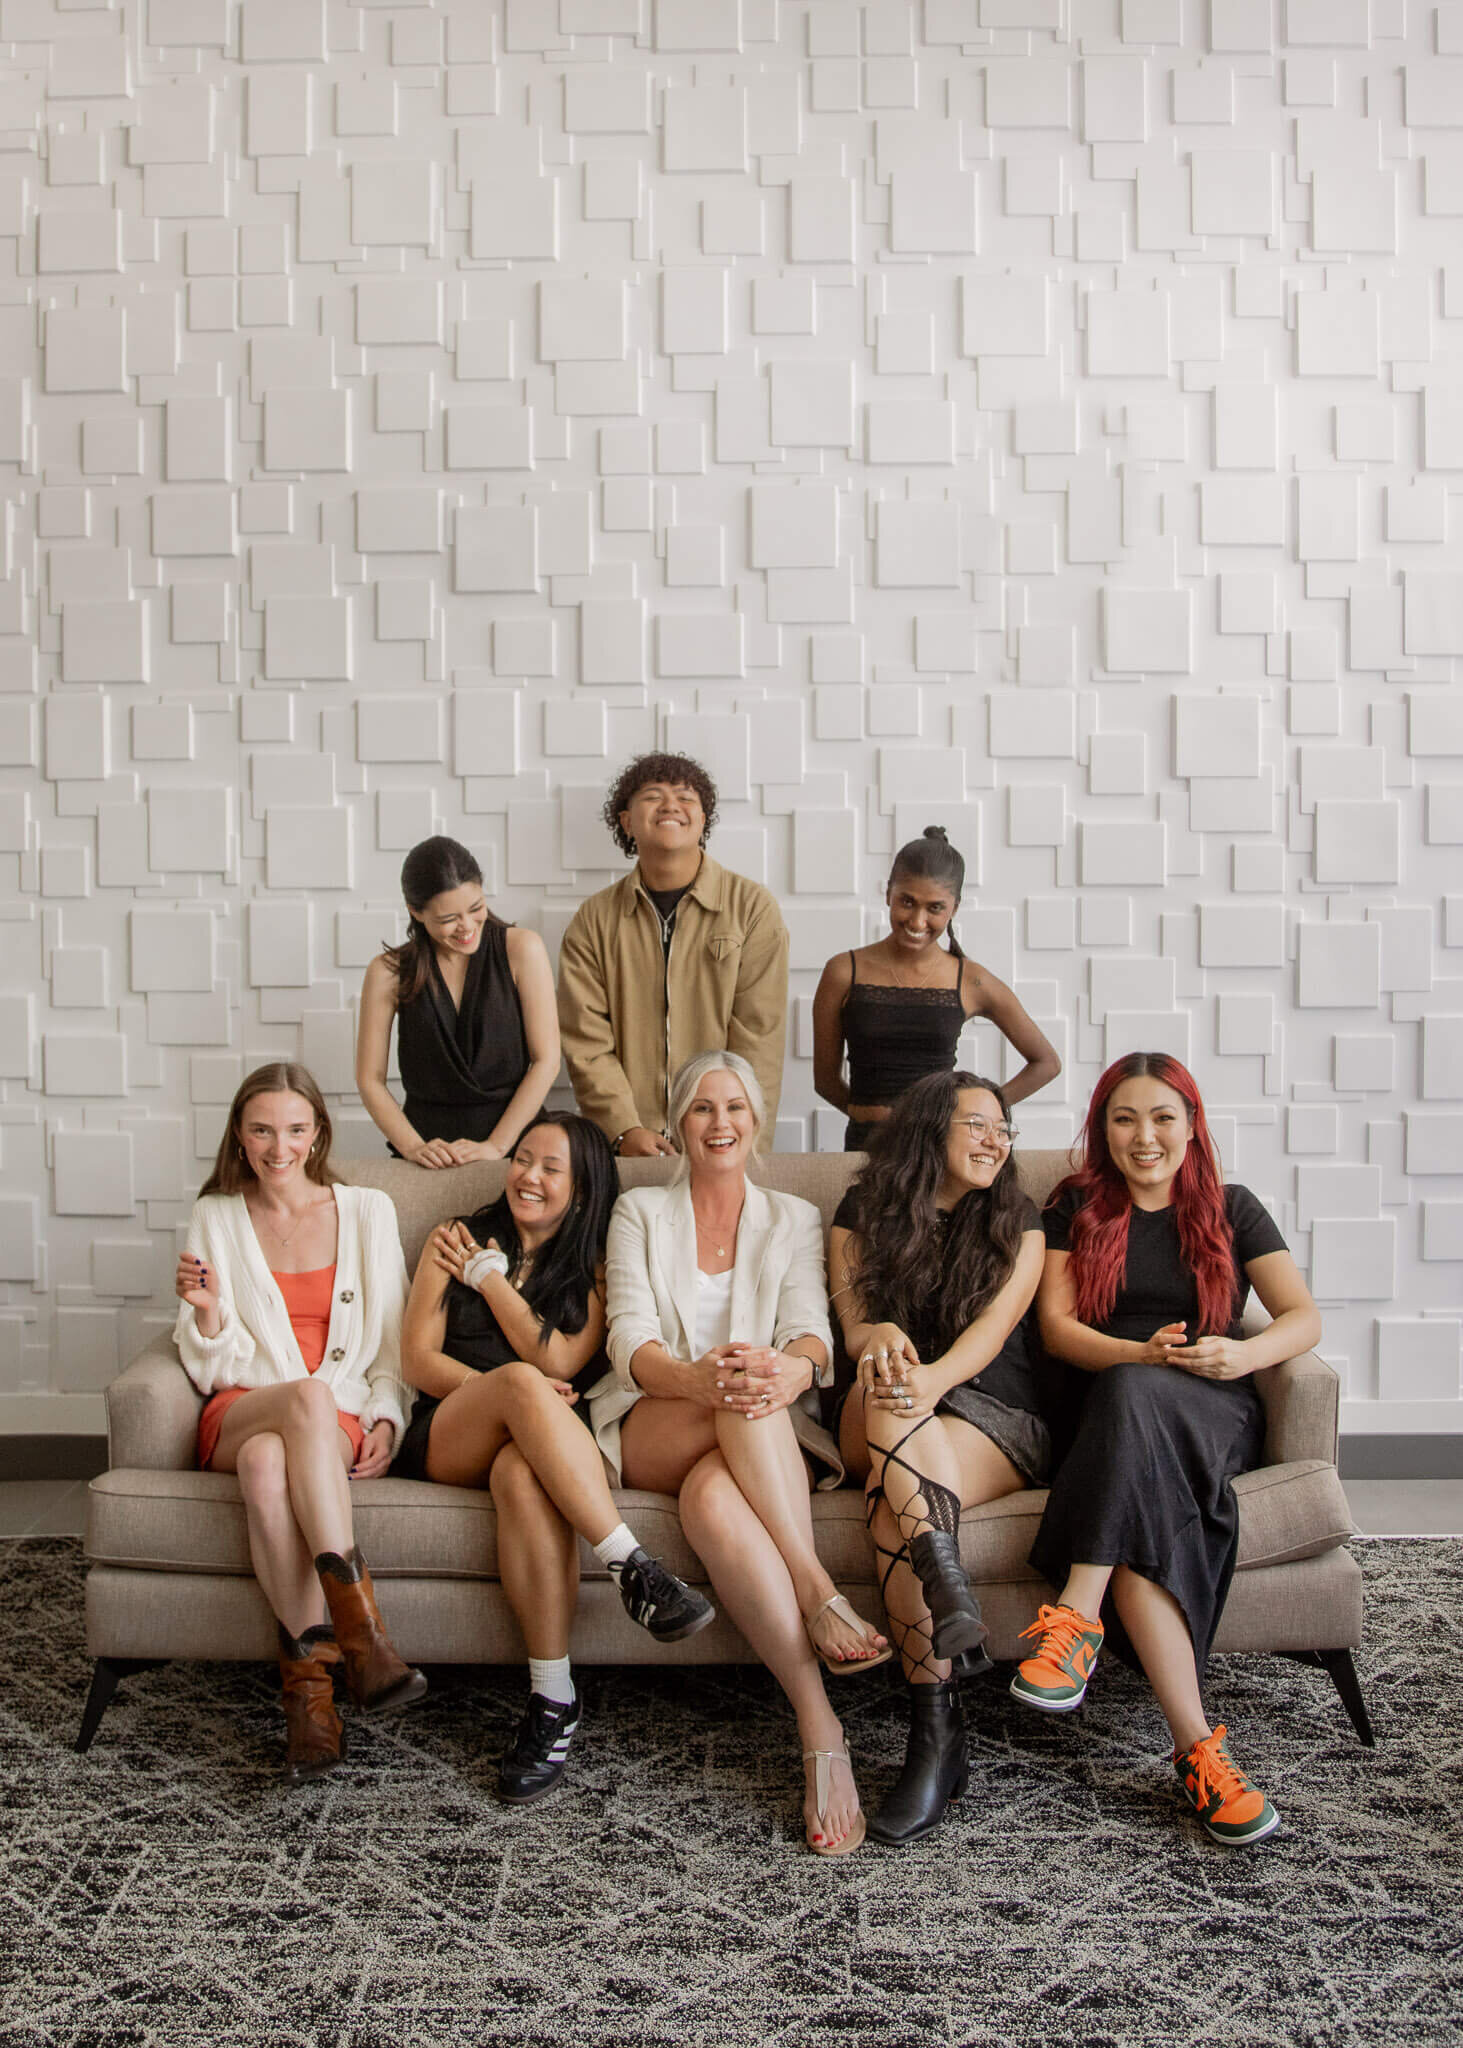 Group of fashion students sitting on a couch